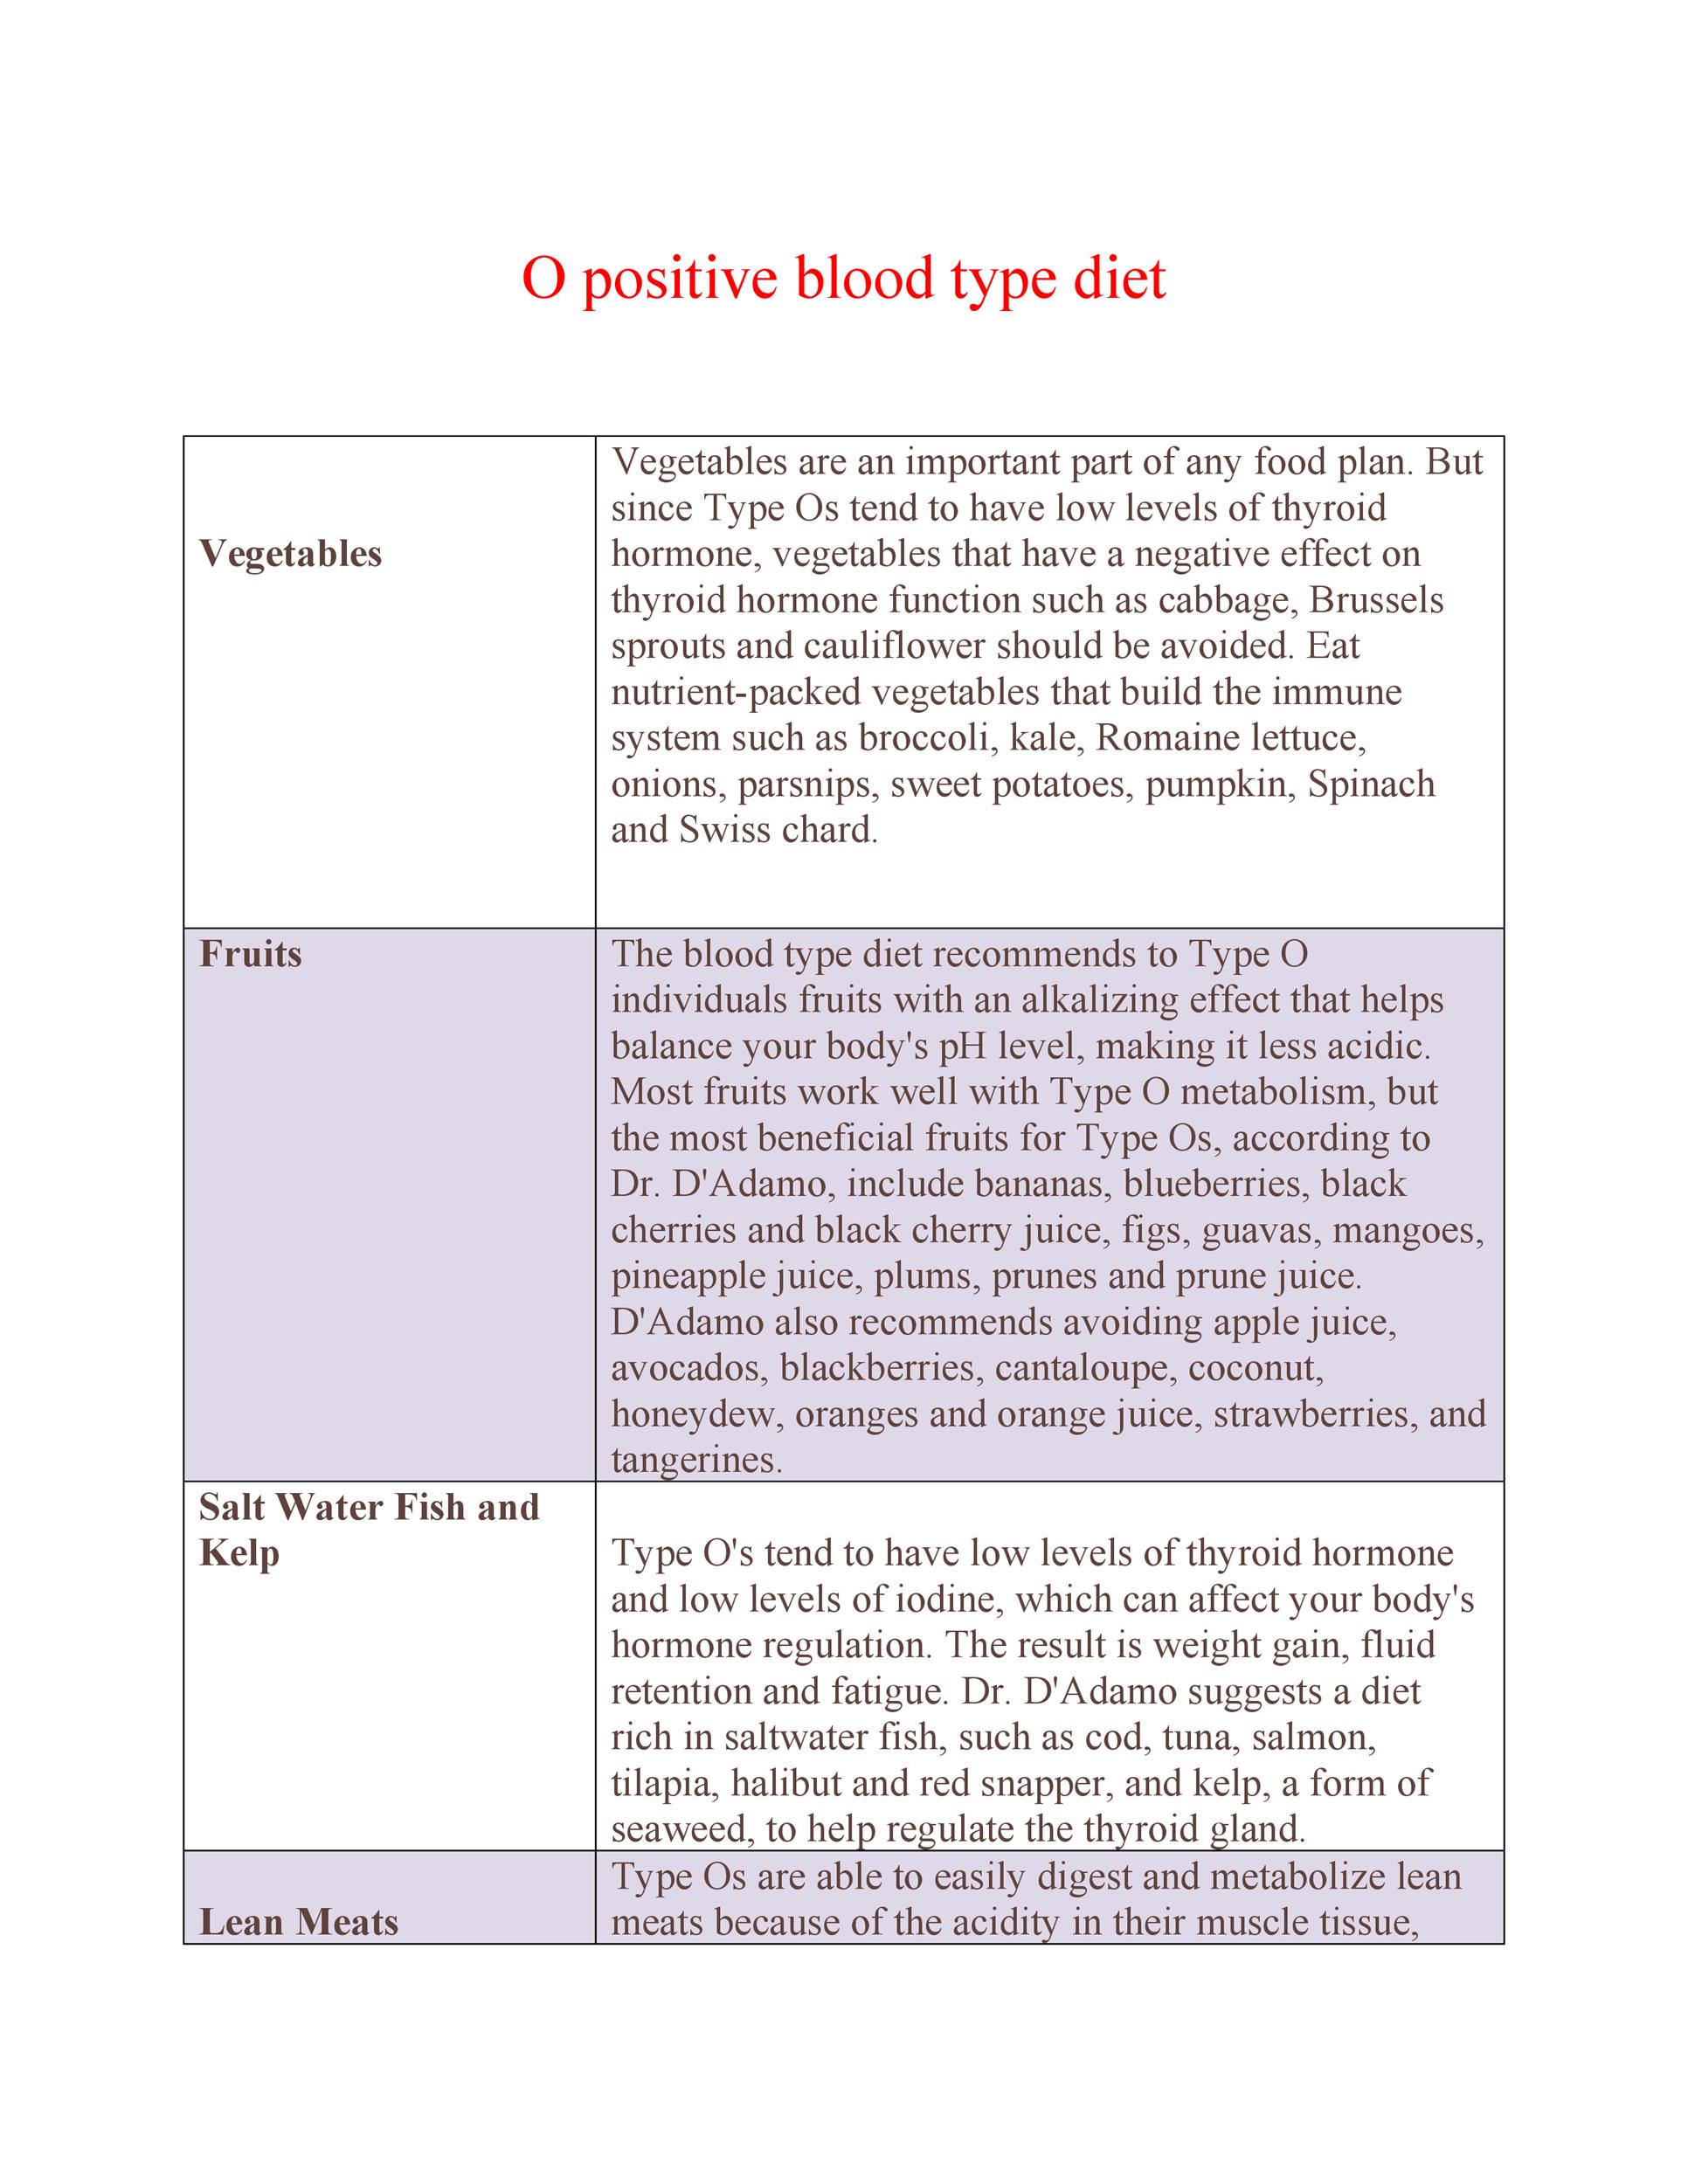 Diet Based On Blood Type A Negative Information